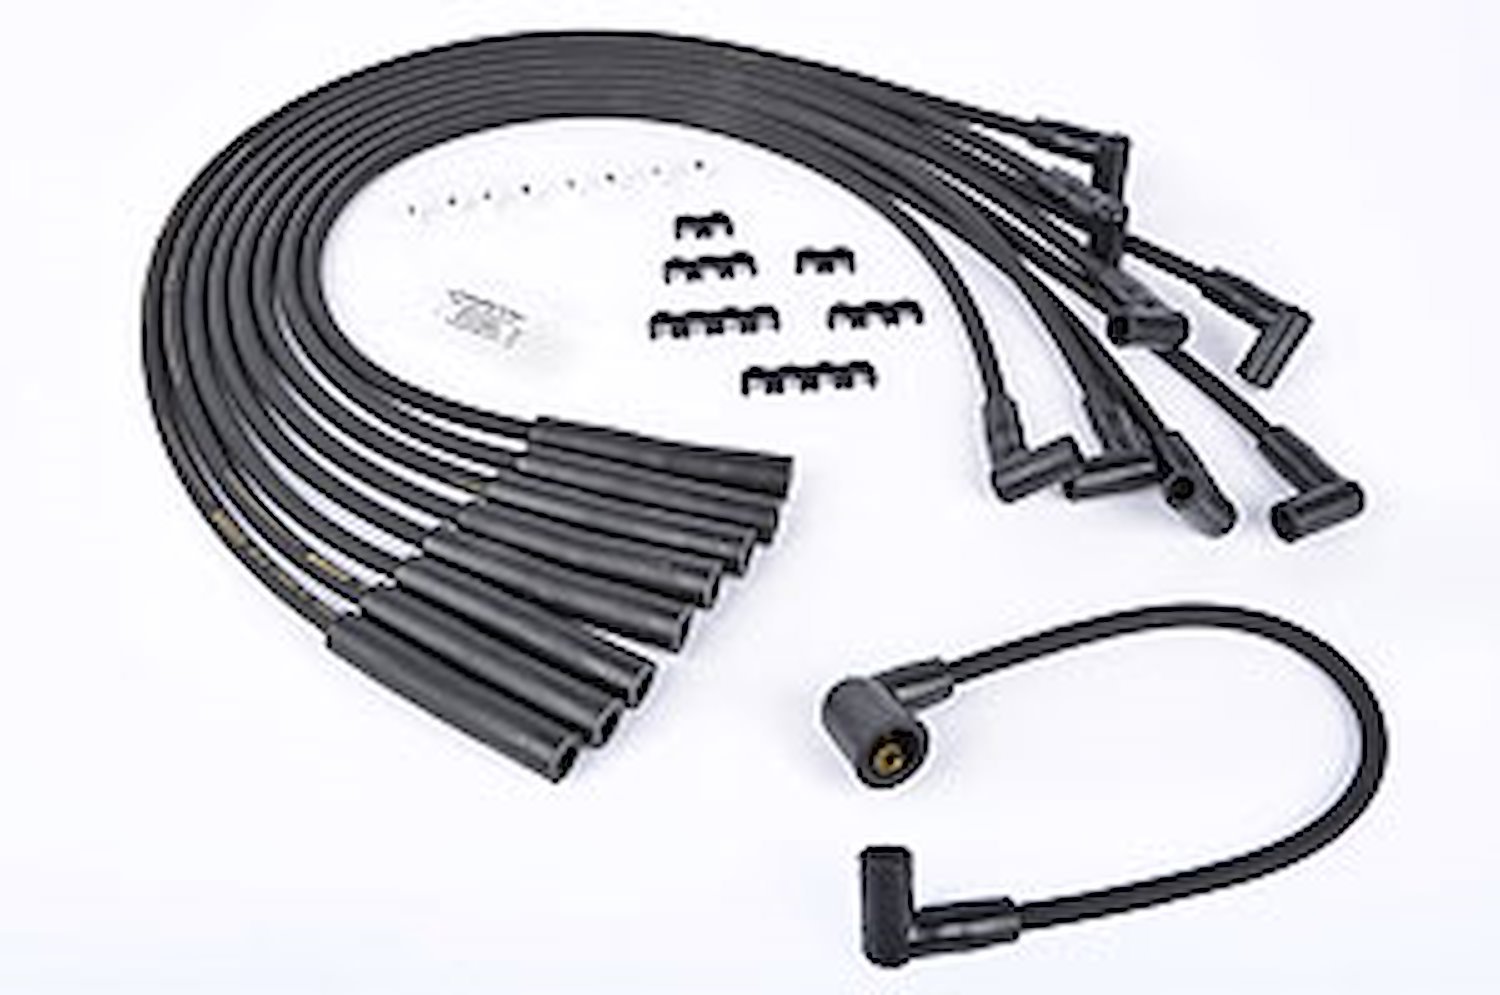 8.5mm Black Ultra Pow'r Wires for Ford 351W, 351C, 390, 429, 460 with HEI Cap